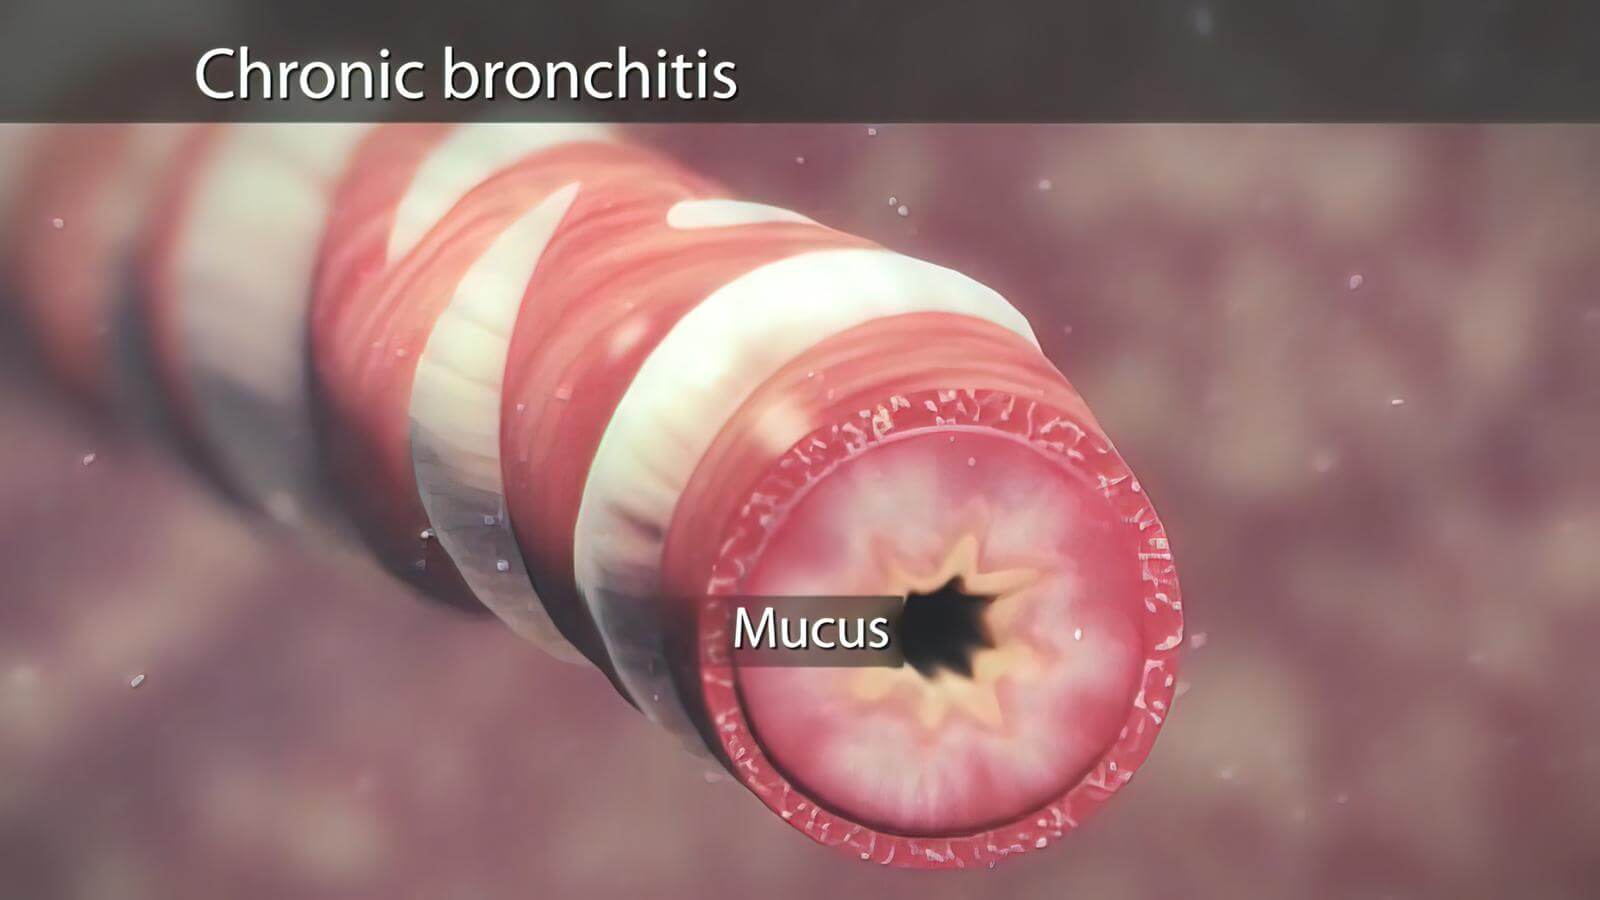 Causes and risk factor for Bronchitis